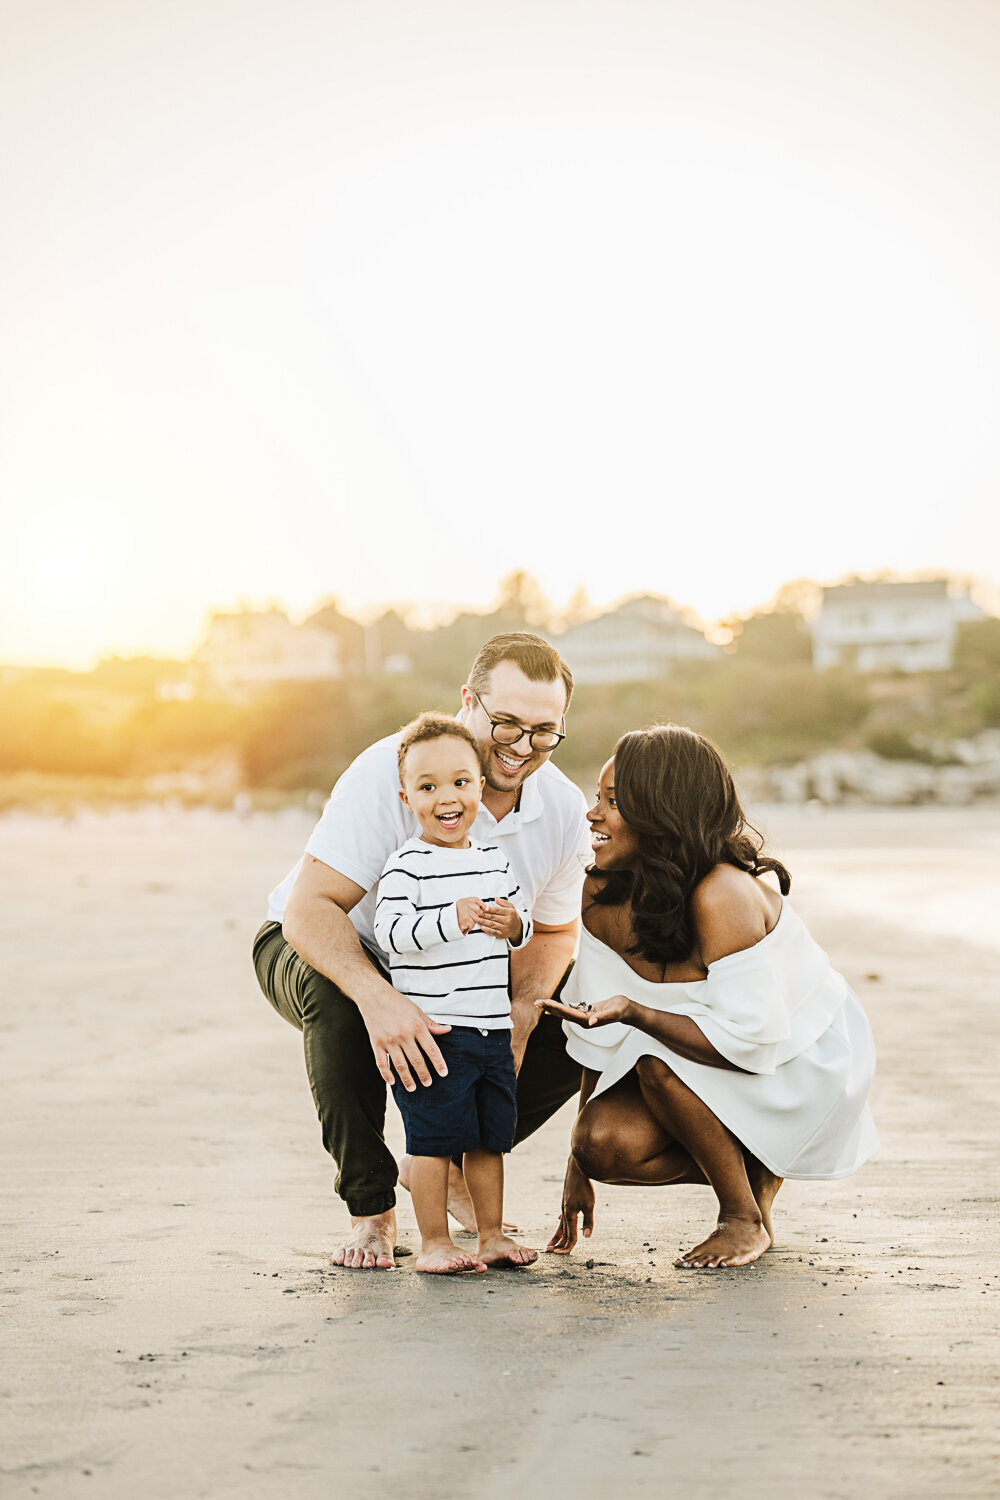 mom and dad laugh with toddler boy on beach at sunset